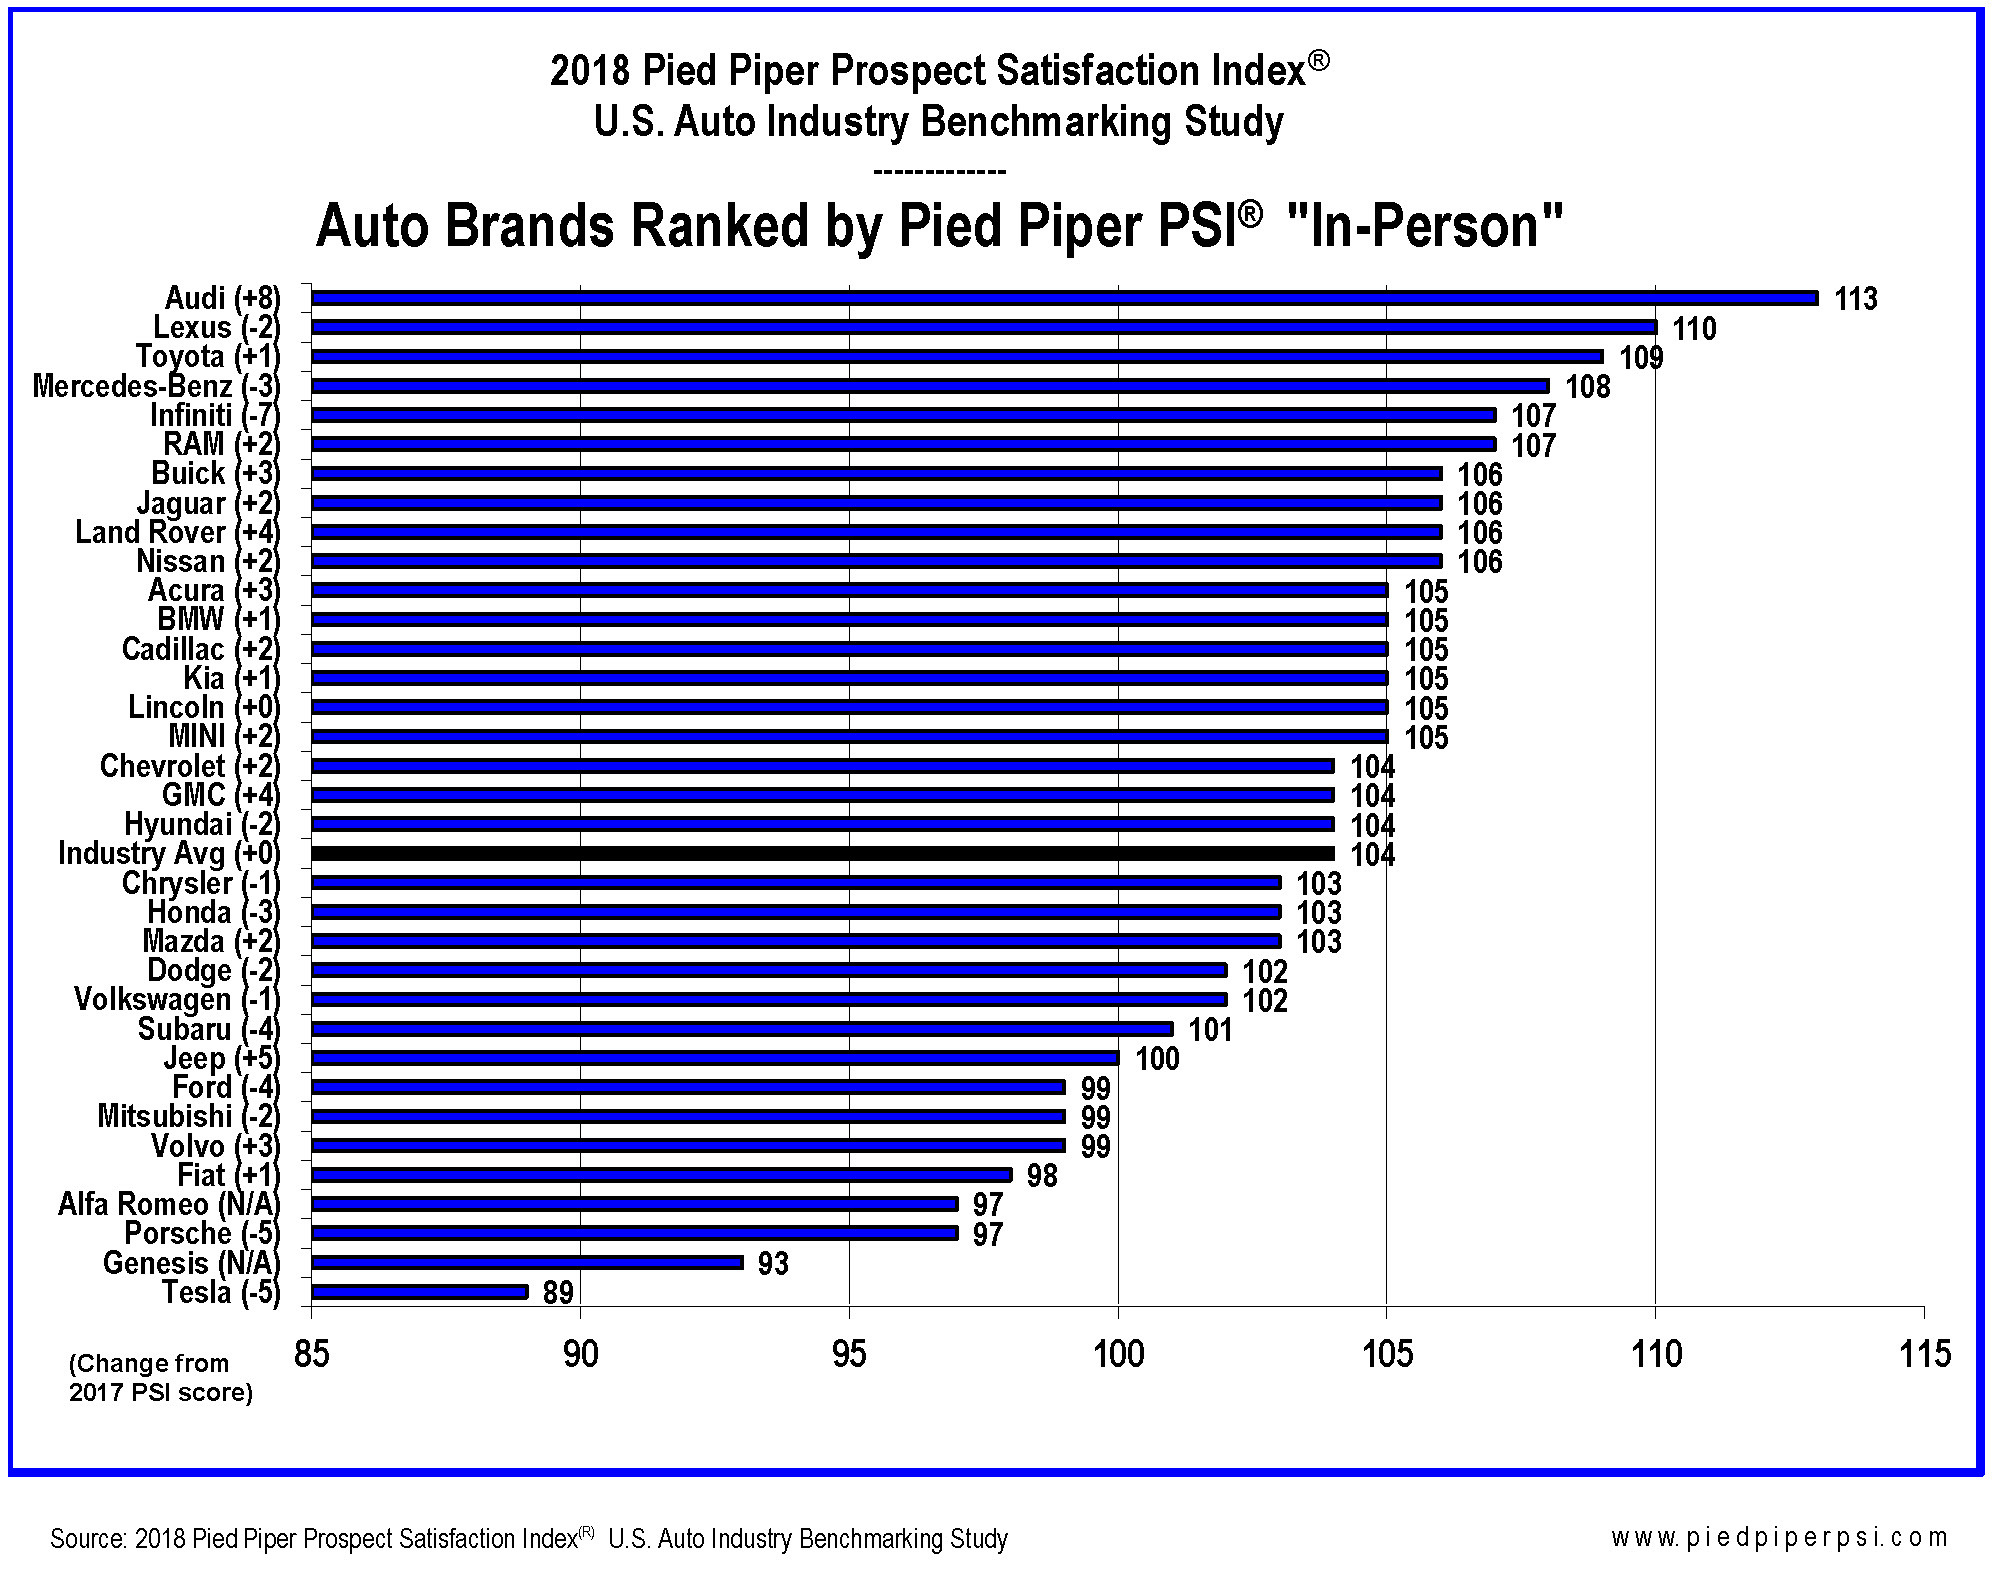 Audi Dealers Ranked Highest by 2018 Pied Piper Prospect Satisfaction Index